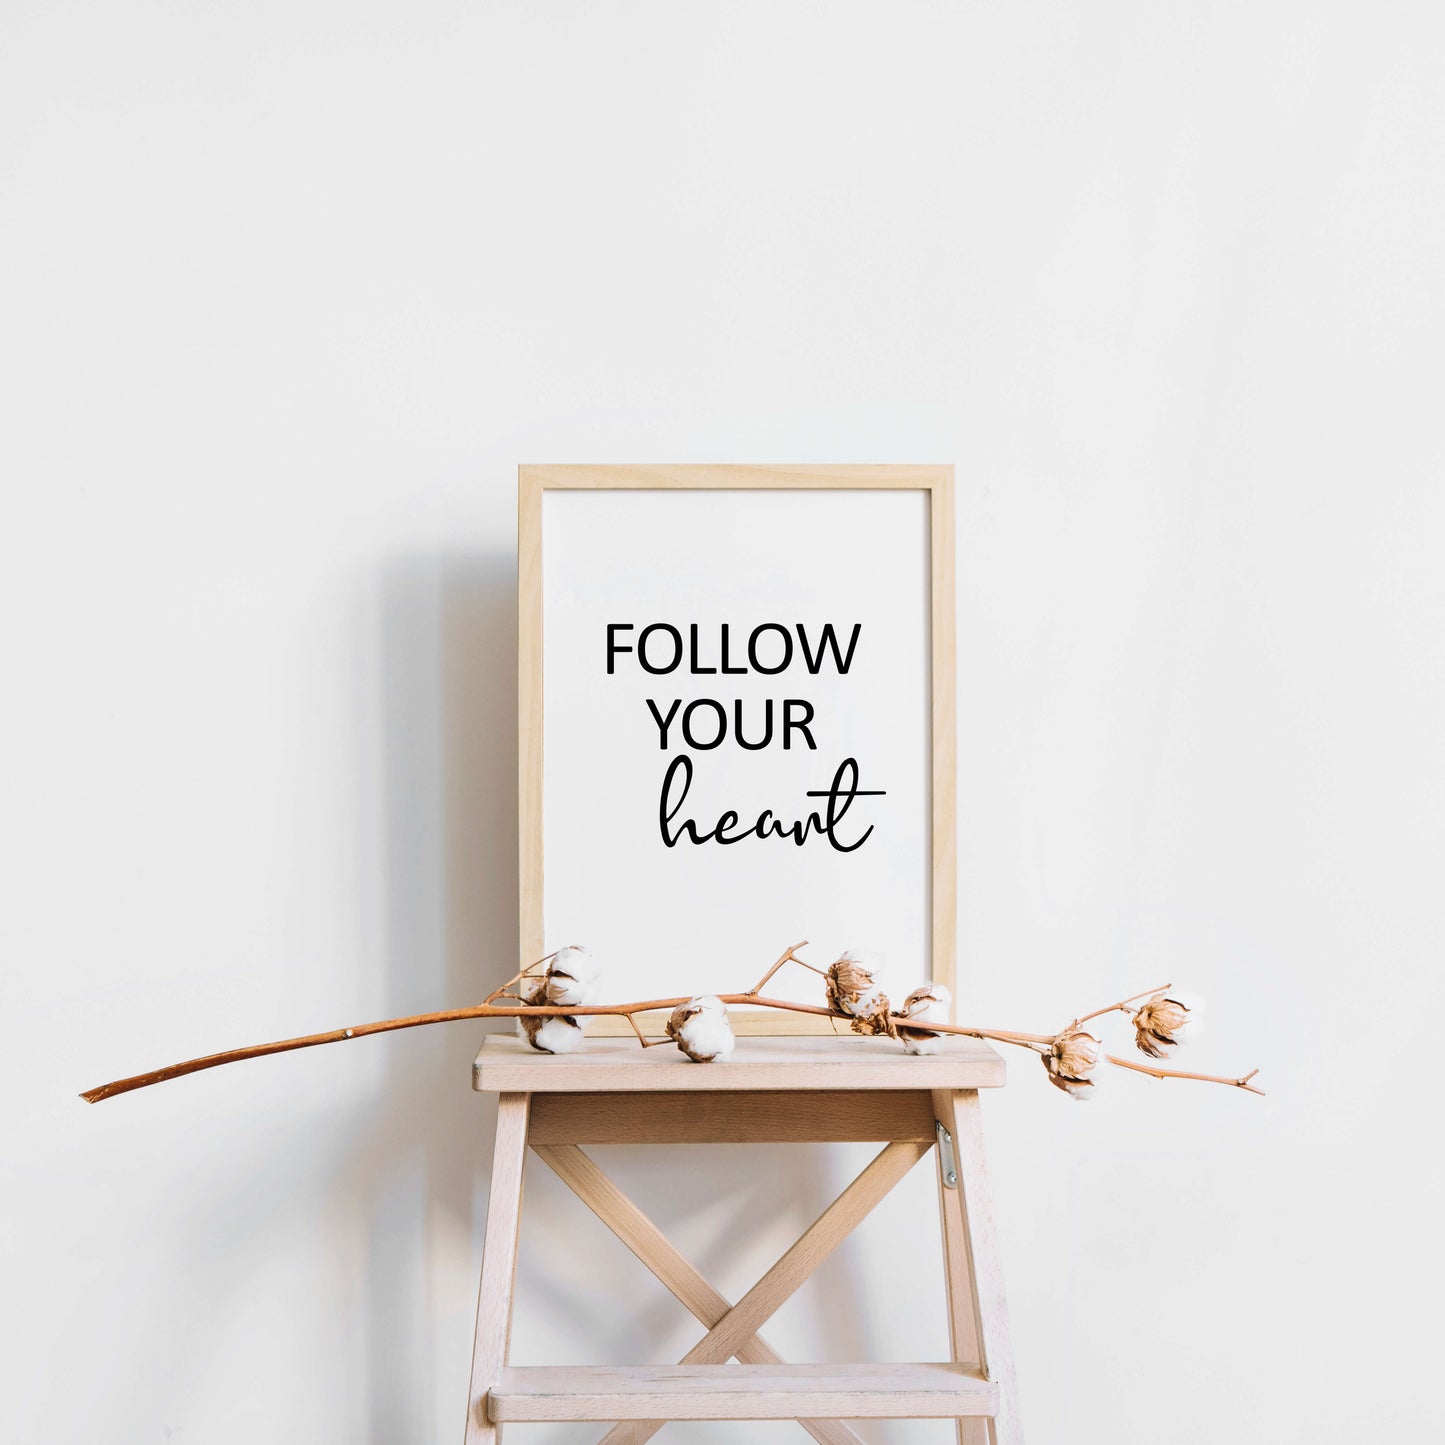 Follow Your Heart Inspirational Print by SixElevenCreations. Product Code SEP0107